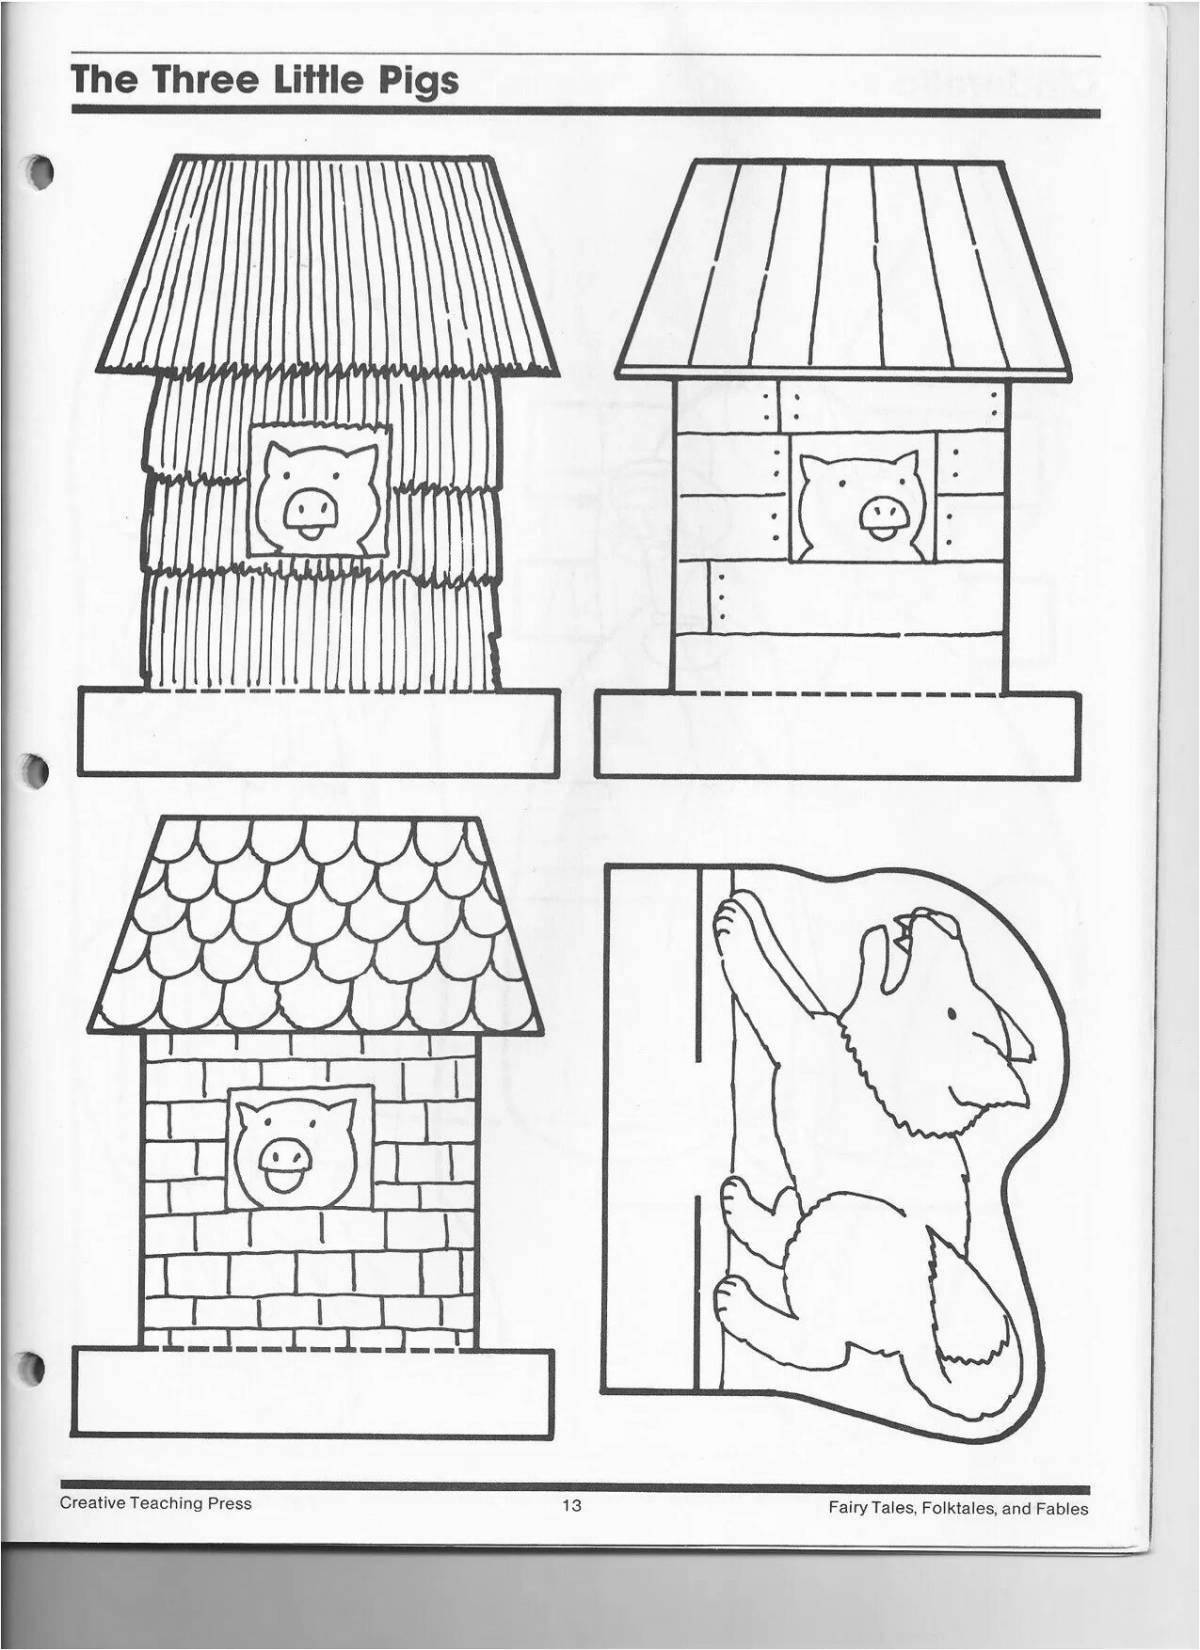 The wild three little pigs with houses